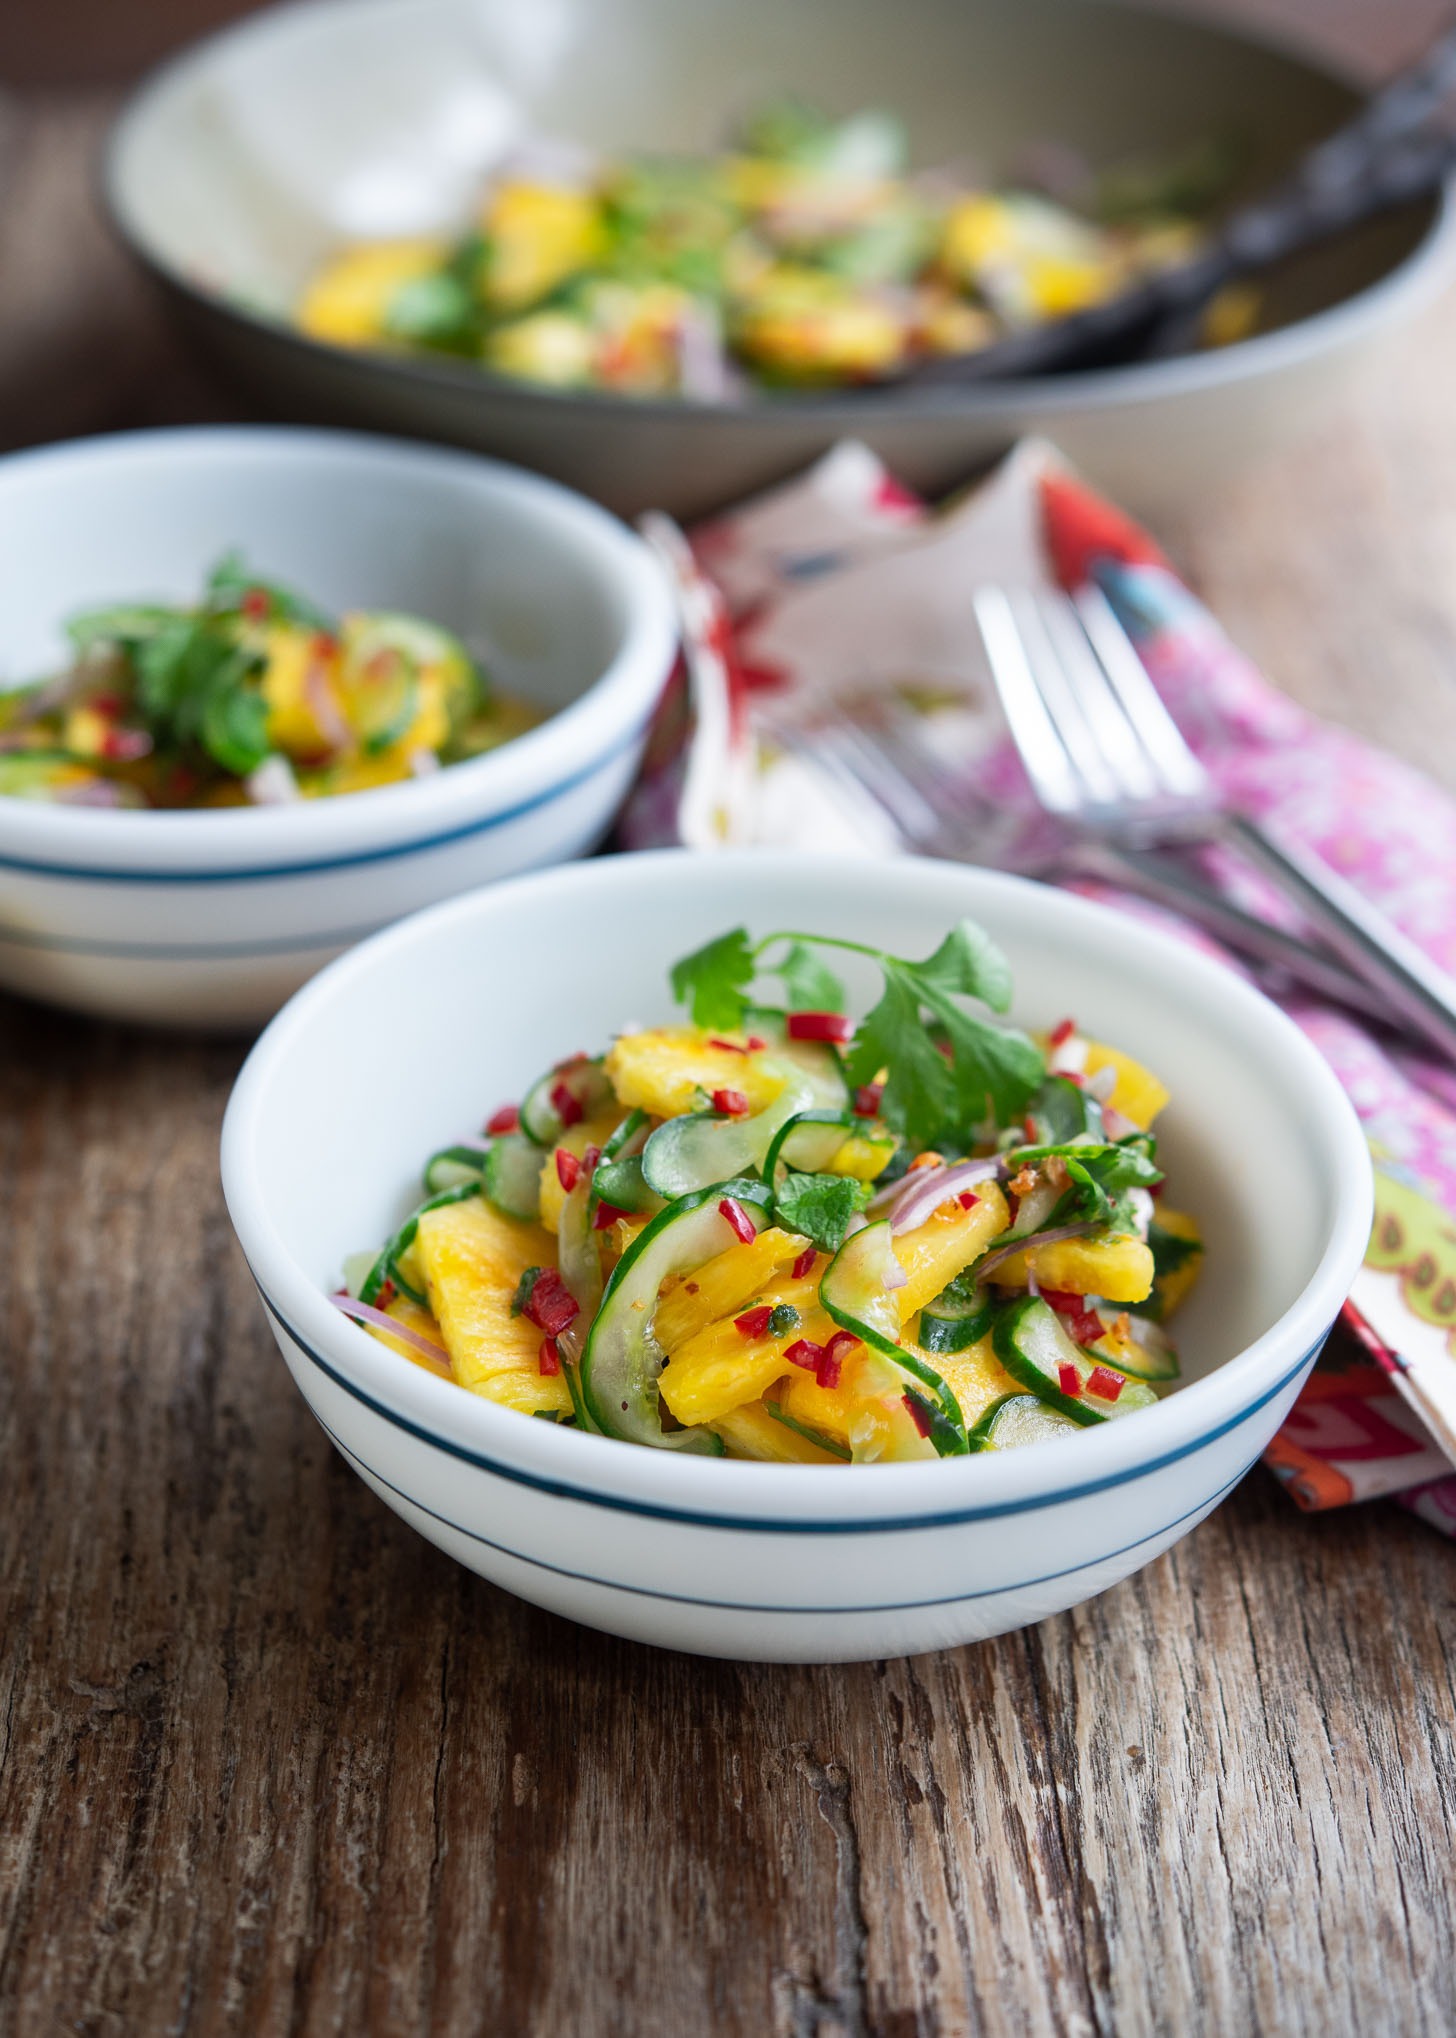 Vibrant colors of Pineapple cucumber salad with Asian flavor.